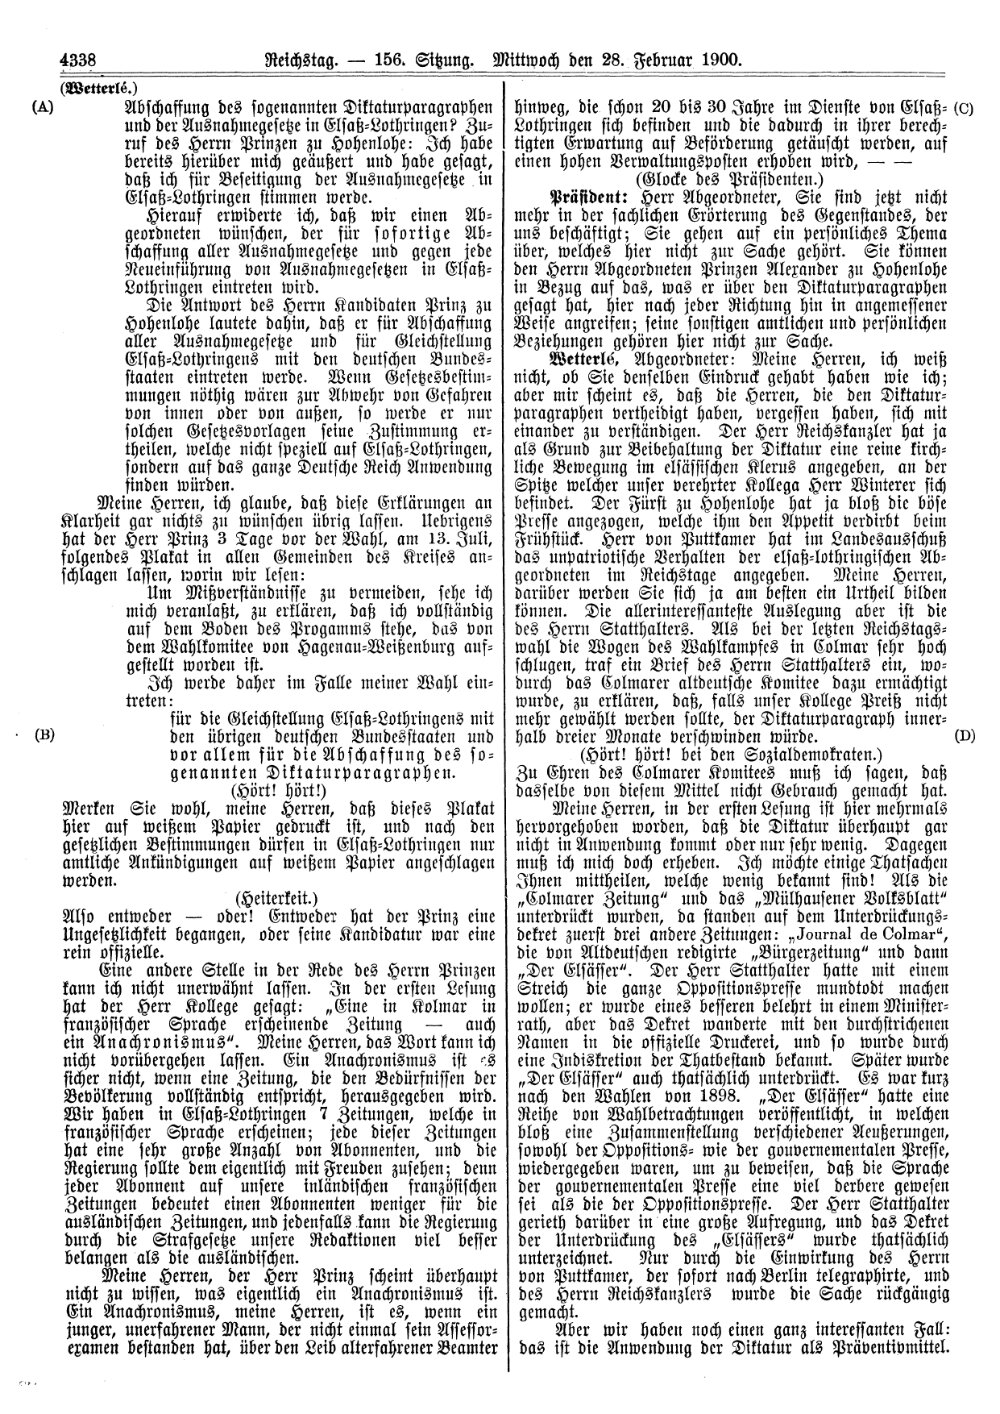 Scan of page 4338